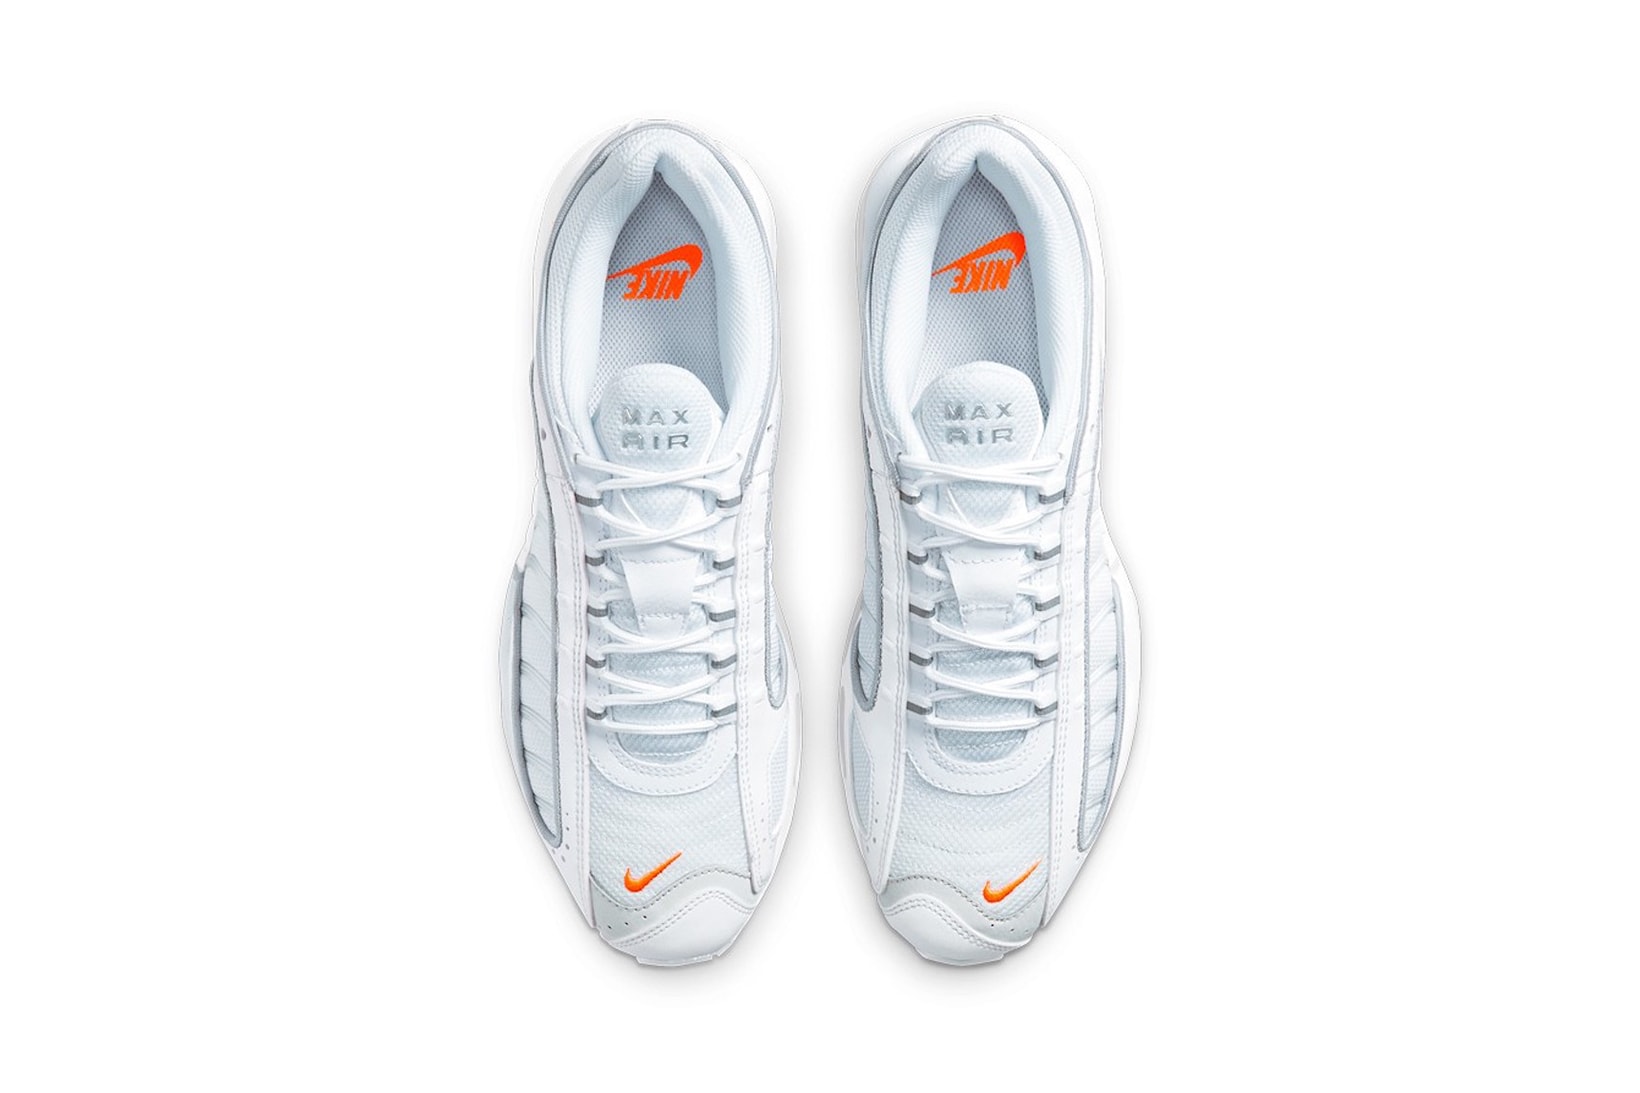 nike air max tailwind iv sneakers platinum tint white silver orange colorway footwear shoes kicks sneakerhead lateral top view insole